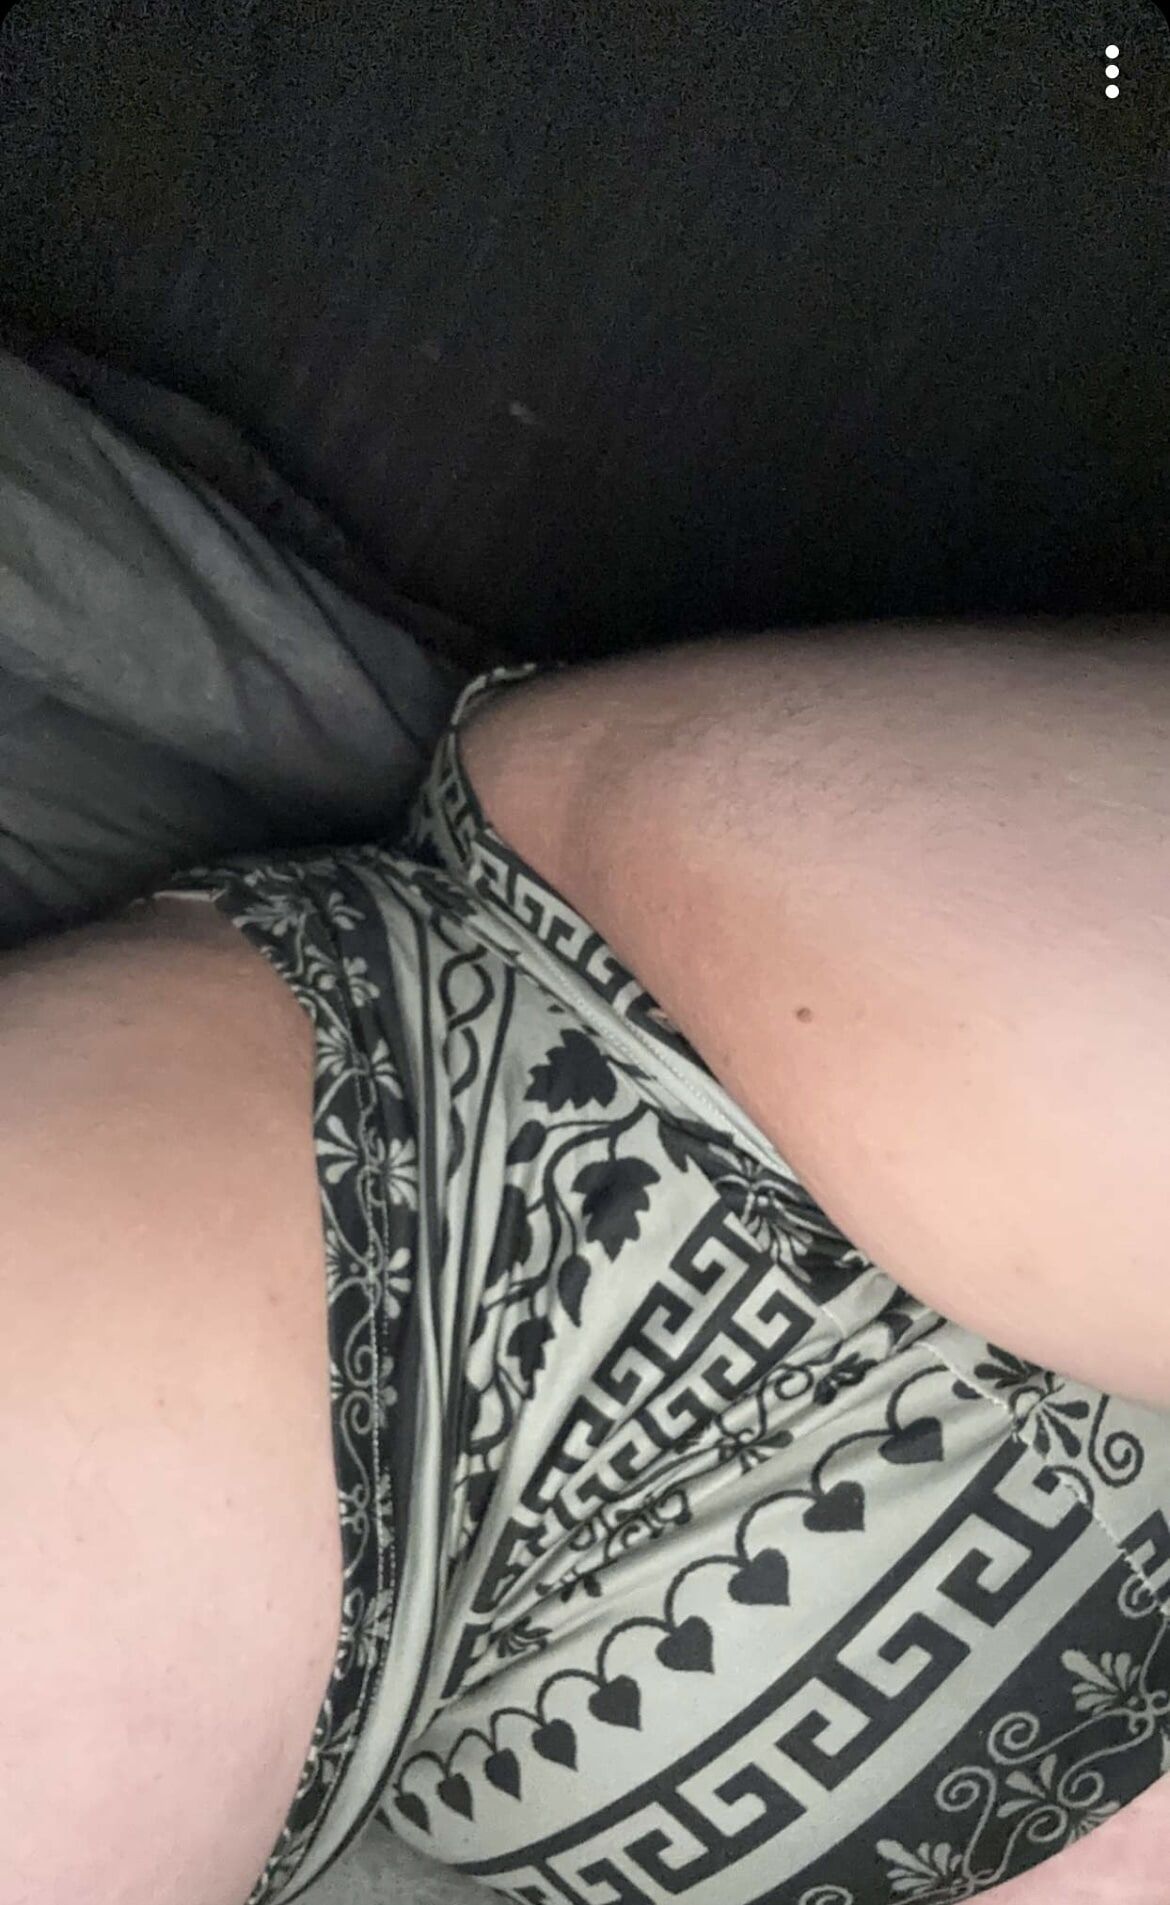 Come look at my pussy and think about doing naughty things  #5